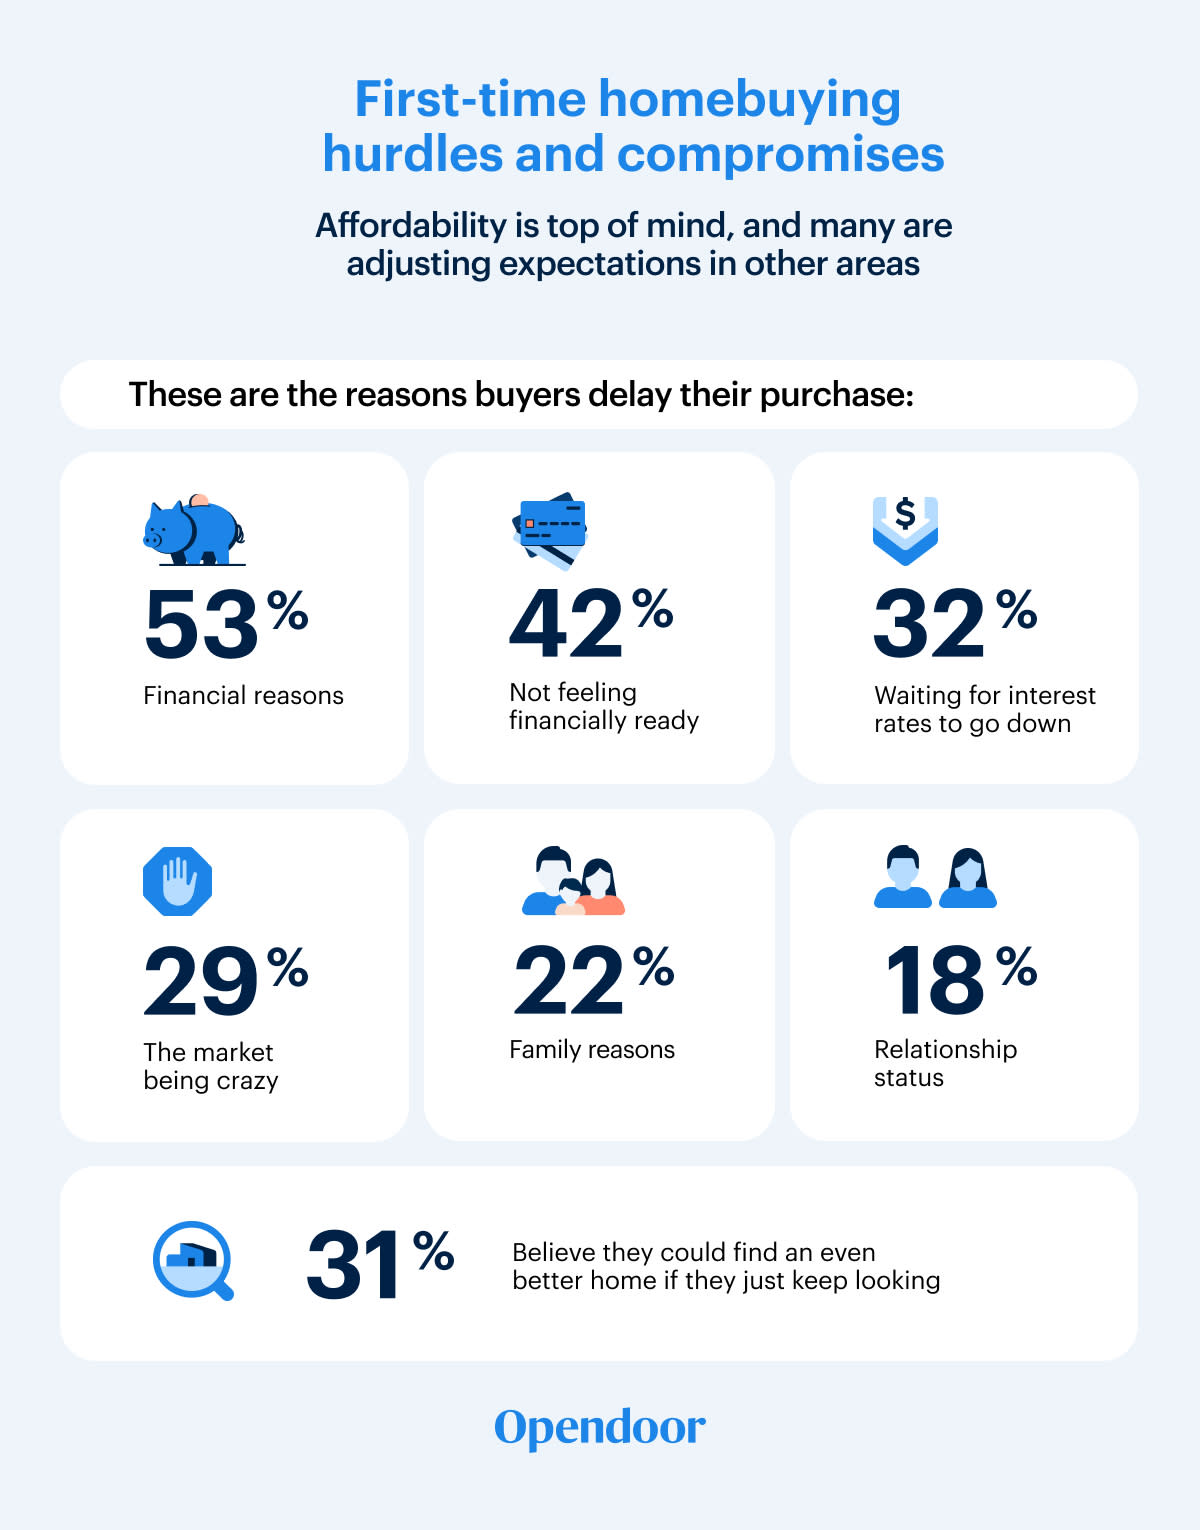 The reasons why first-time home shoppers delay their purchase.